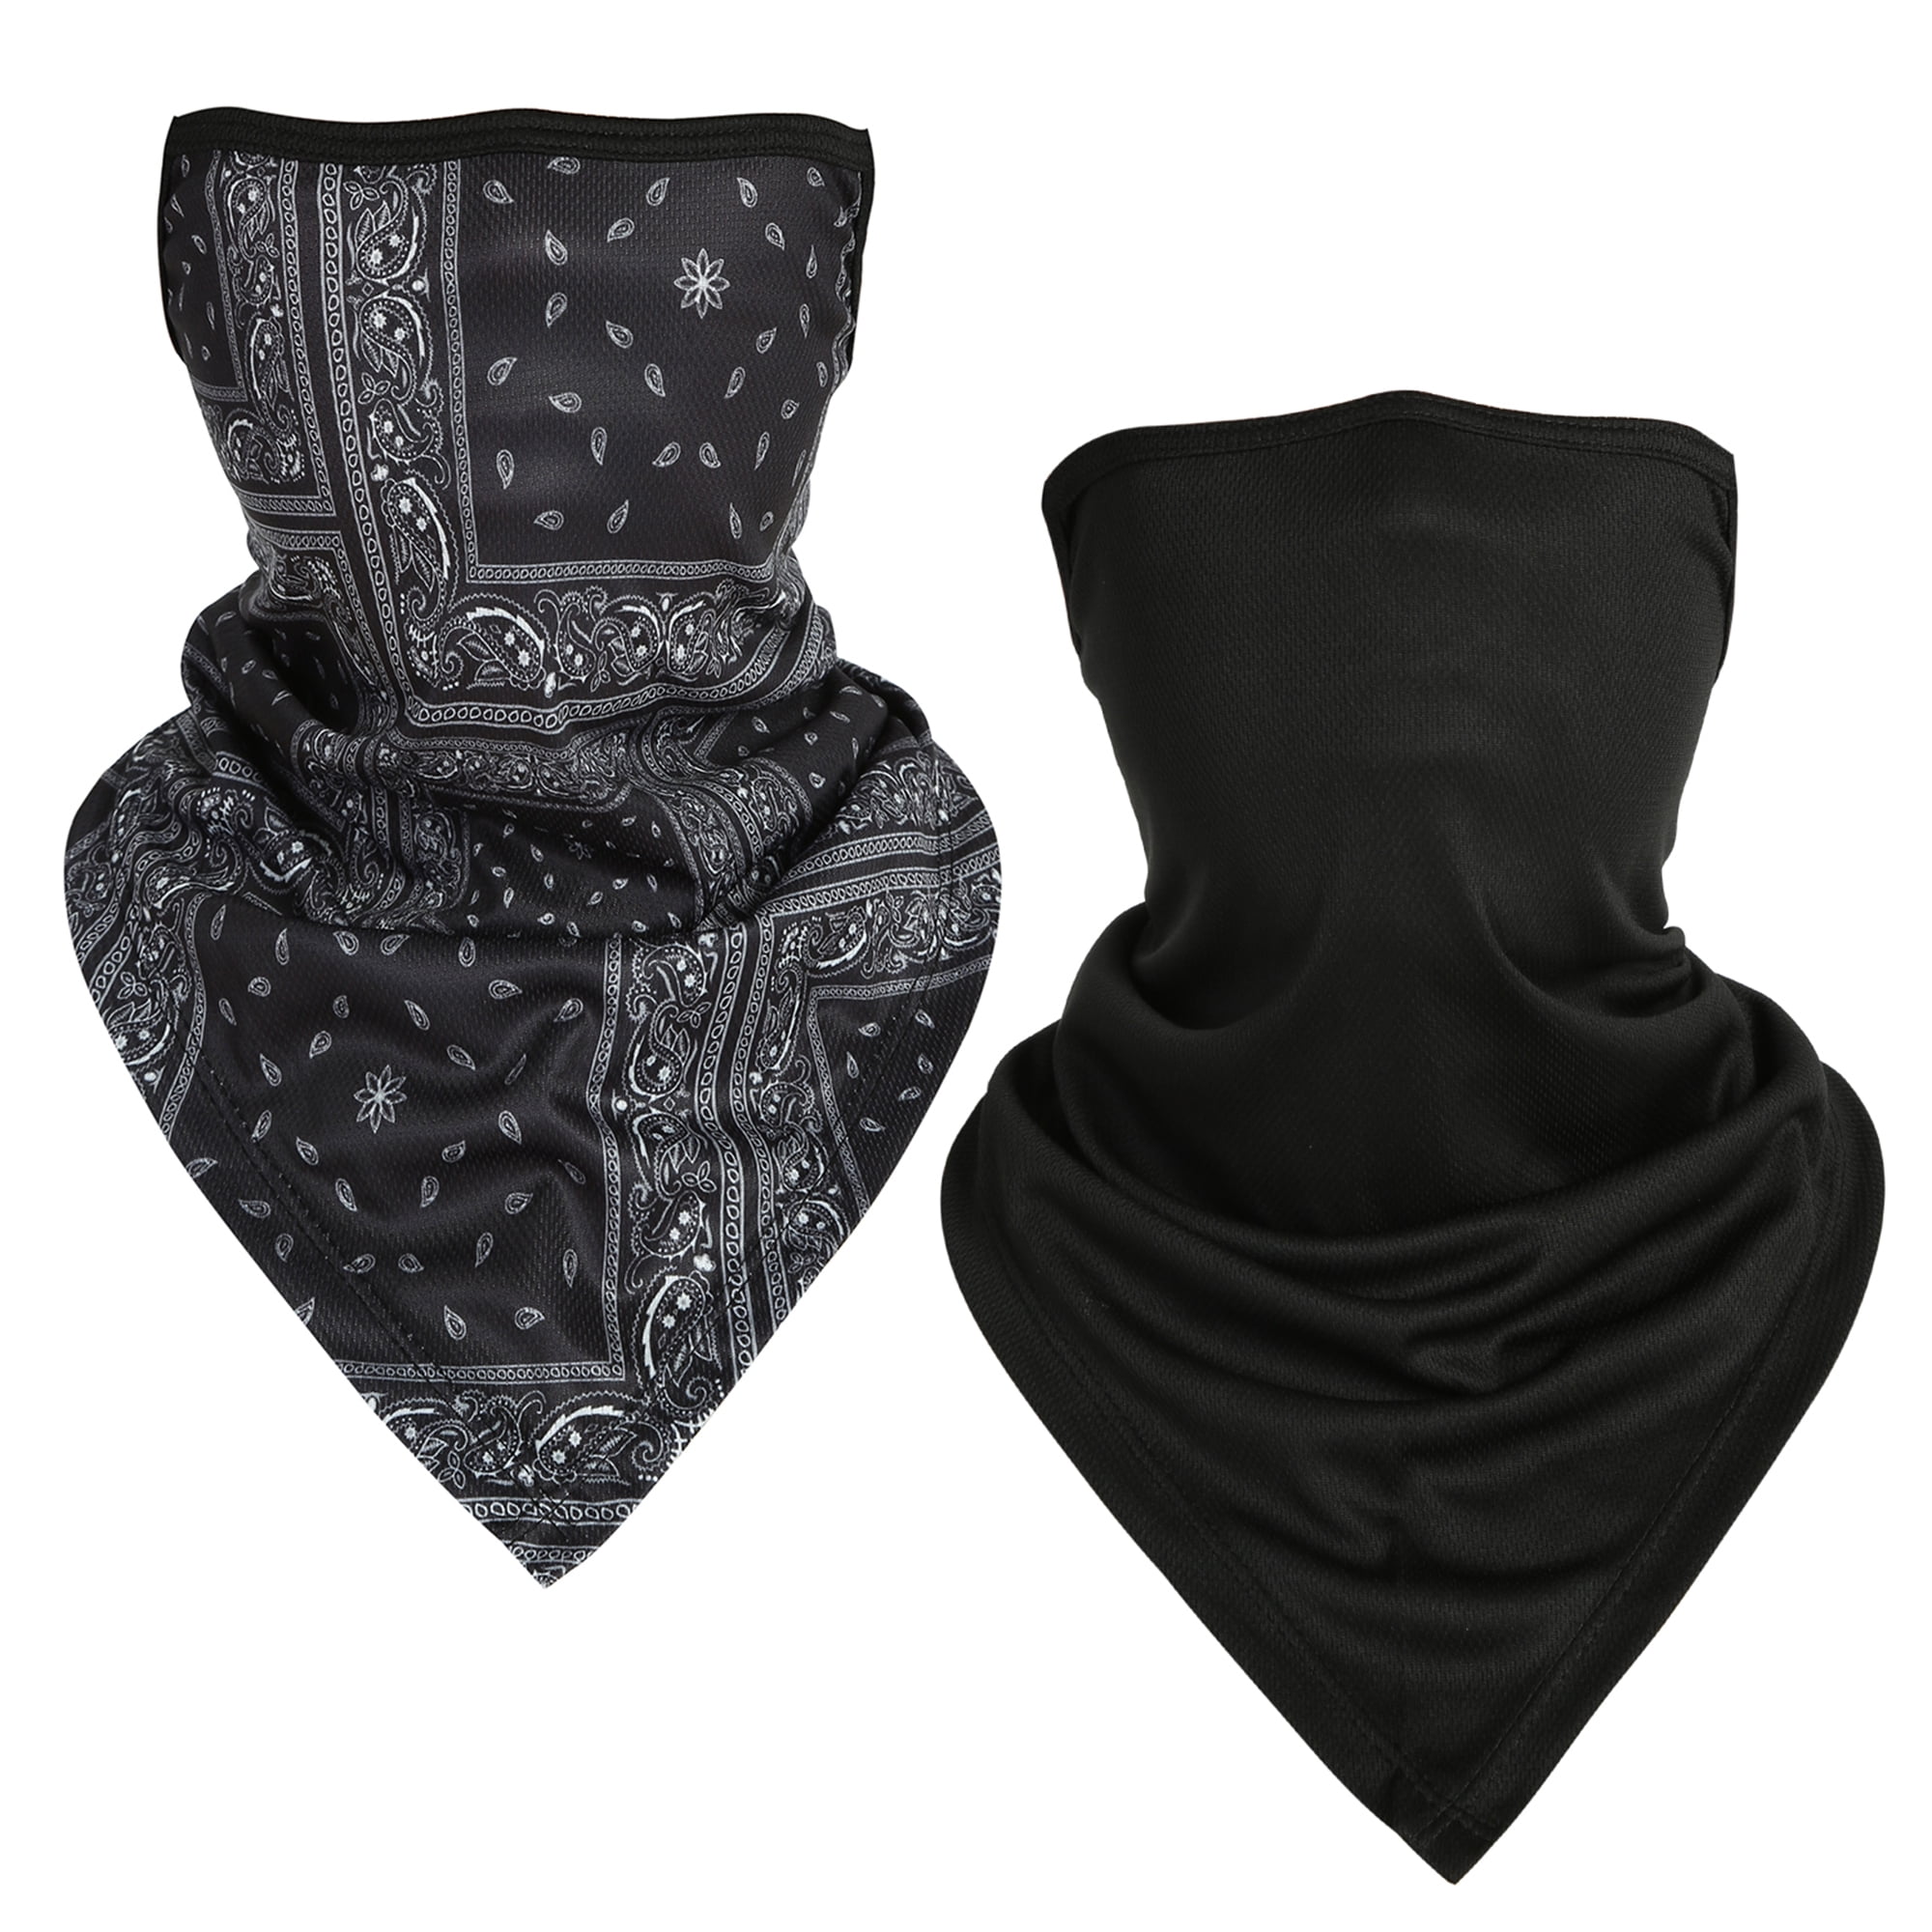 7 PCS Unisex Floral Paisley Triangle Face Cover Earloop Seamless Bandana Scarf Neck Gaiter for Men Women with 14 Pack Actived Carbon Filters Face Shield/Loop Scarf/Bandana/Balaclava